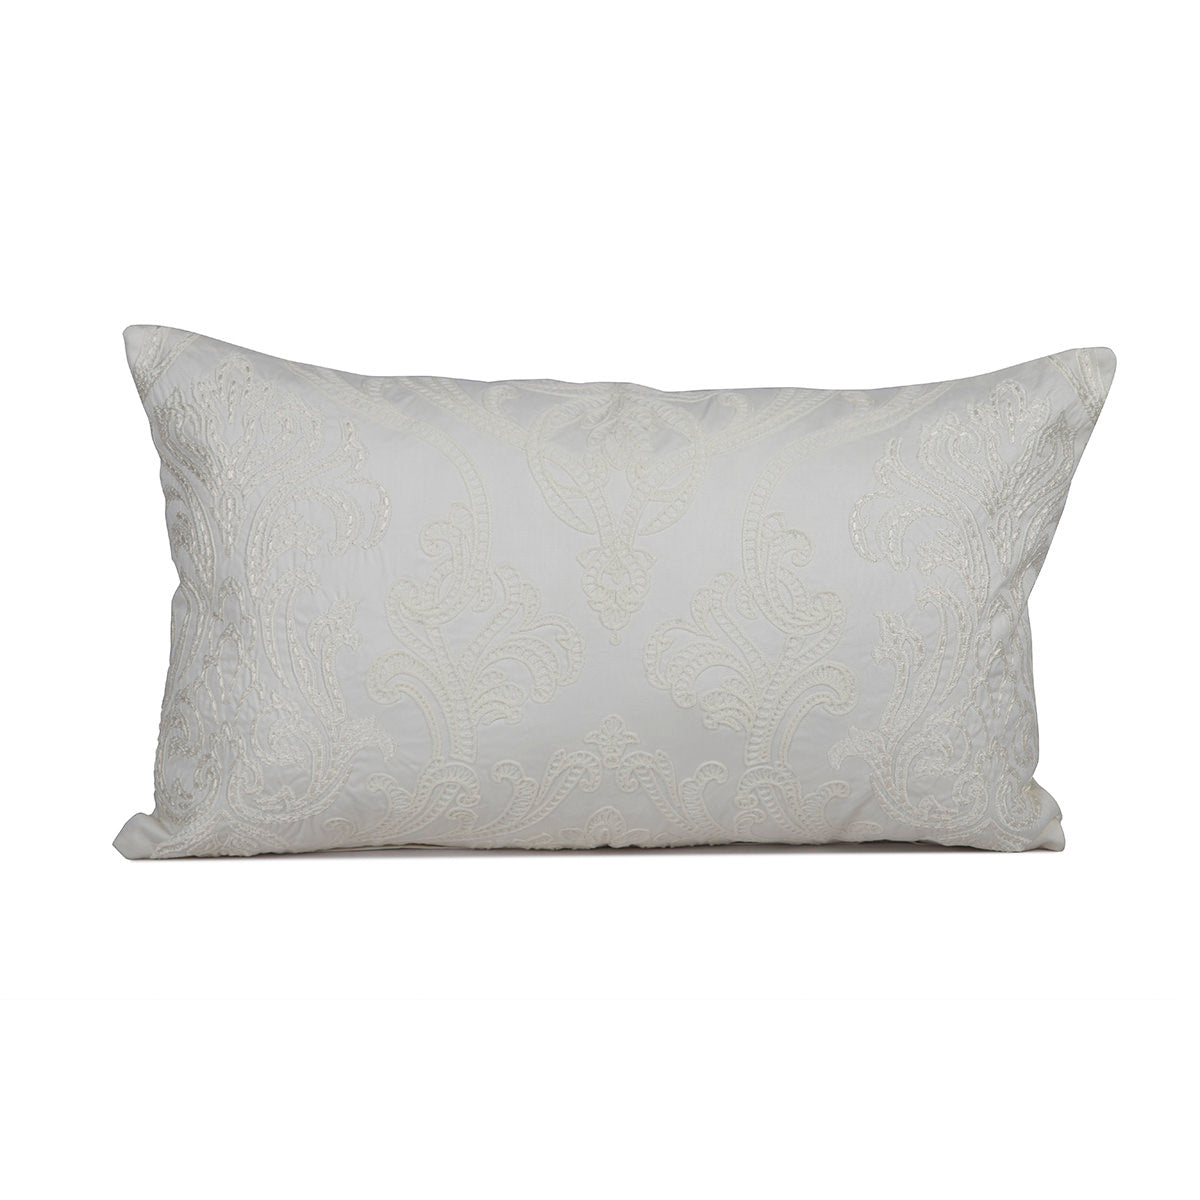 Archaic Embroidered Cushion Cover